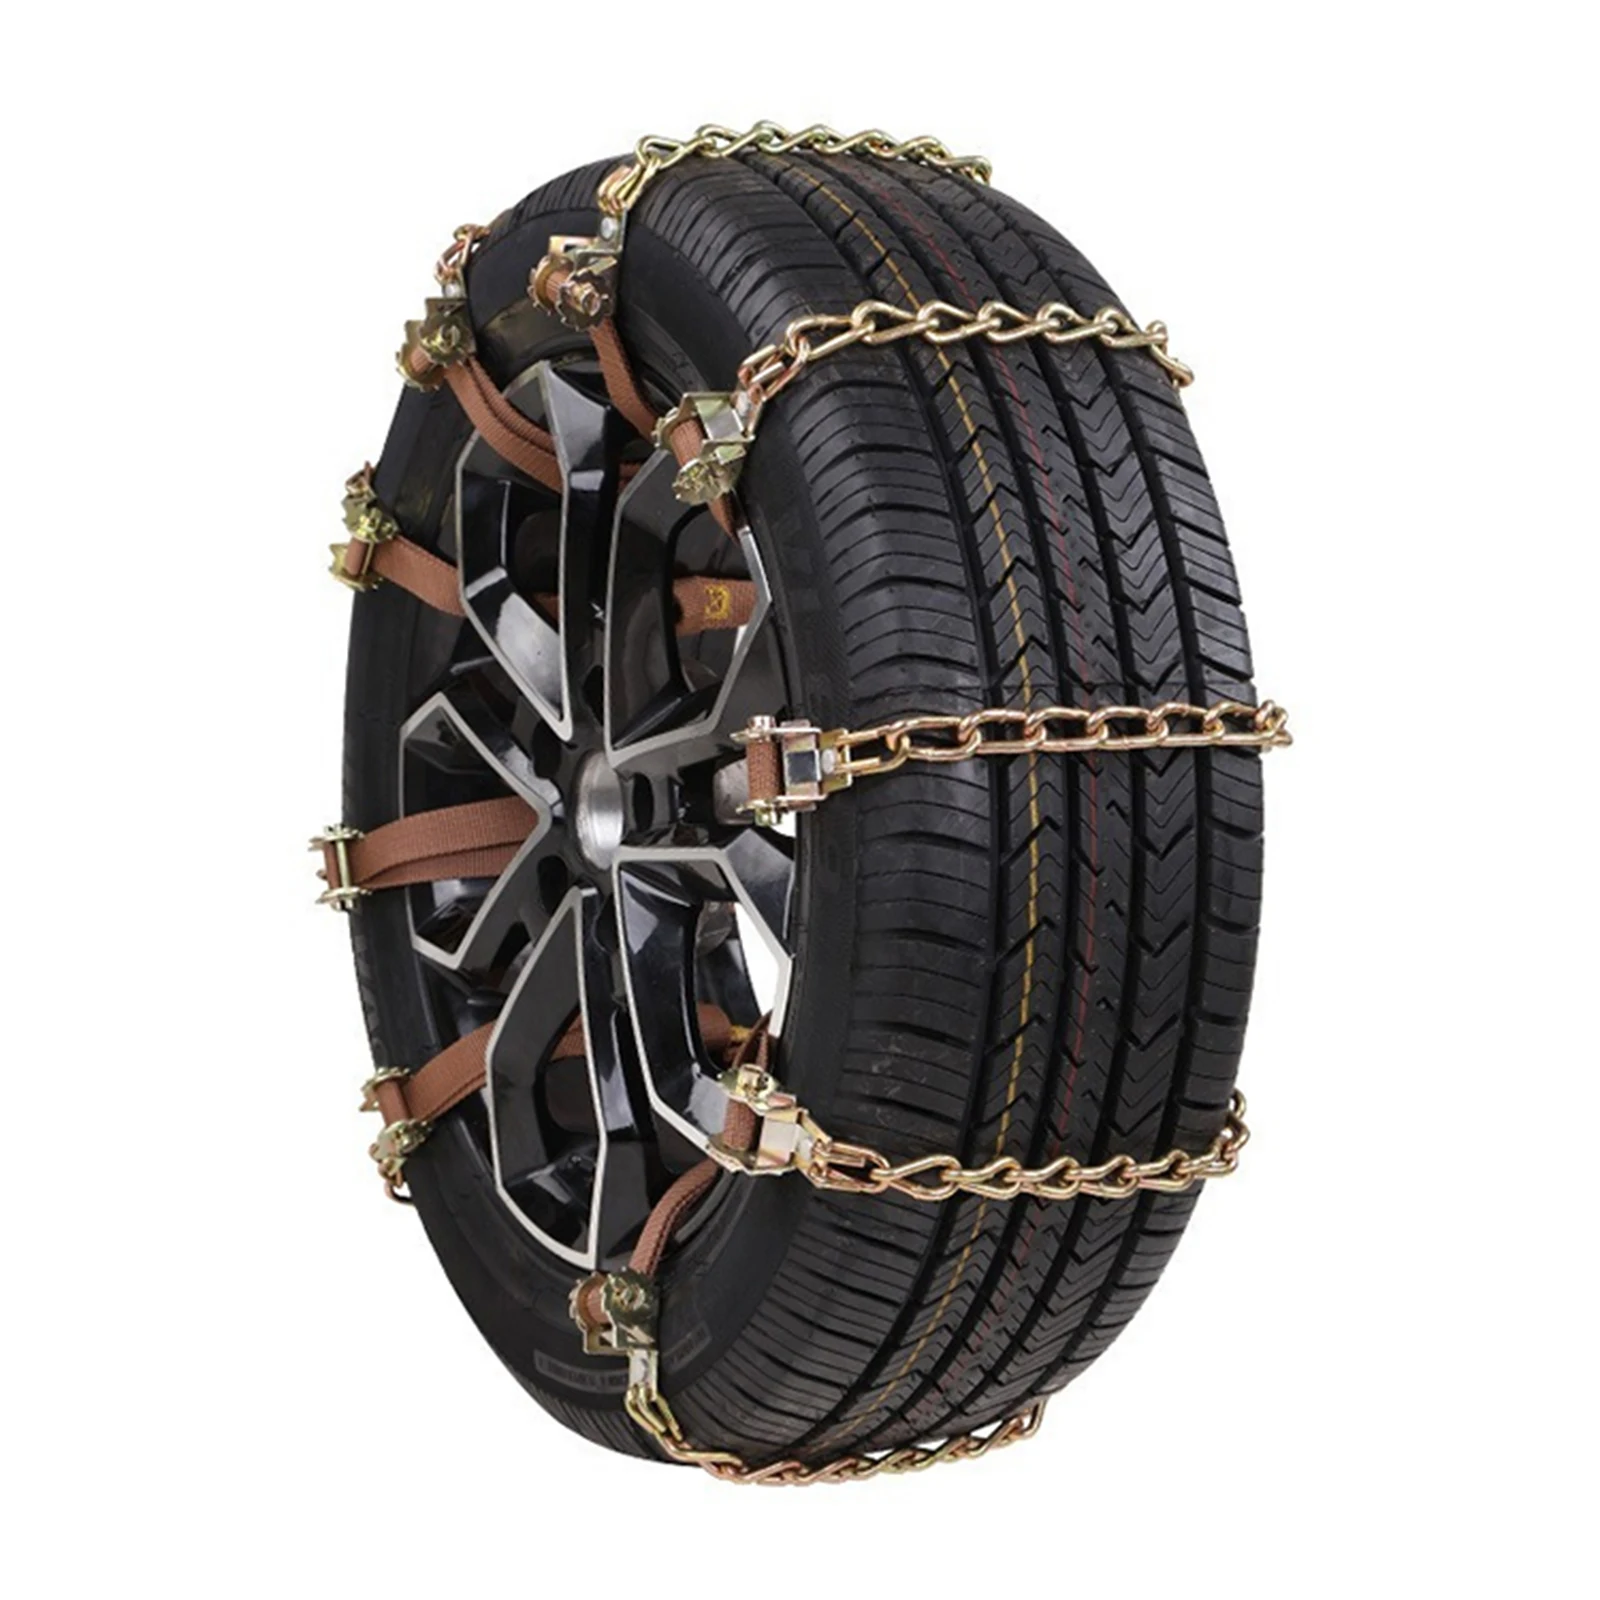 

Car Snow Tire Chains Anti-Skid Winter Tire Chains Universal Wheels Chains For All Vehicles Automobile Car Tire Accessory